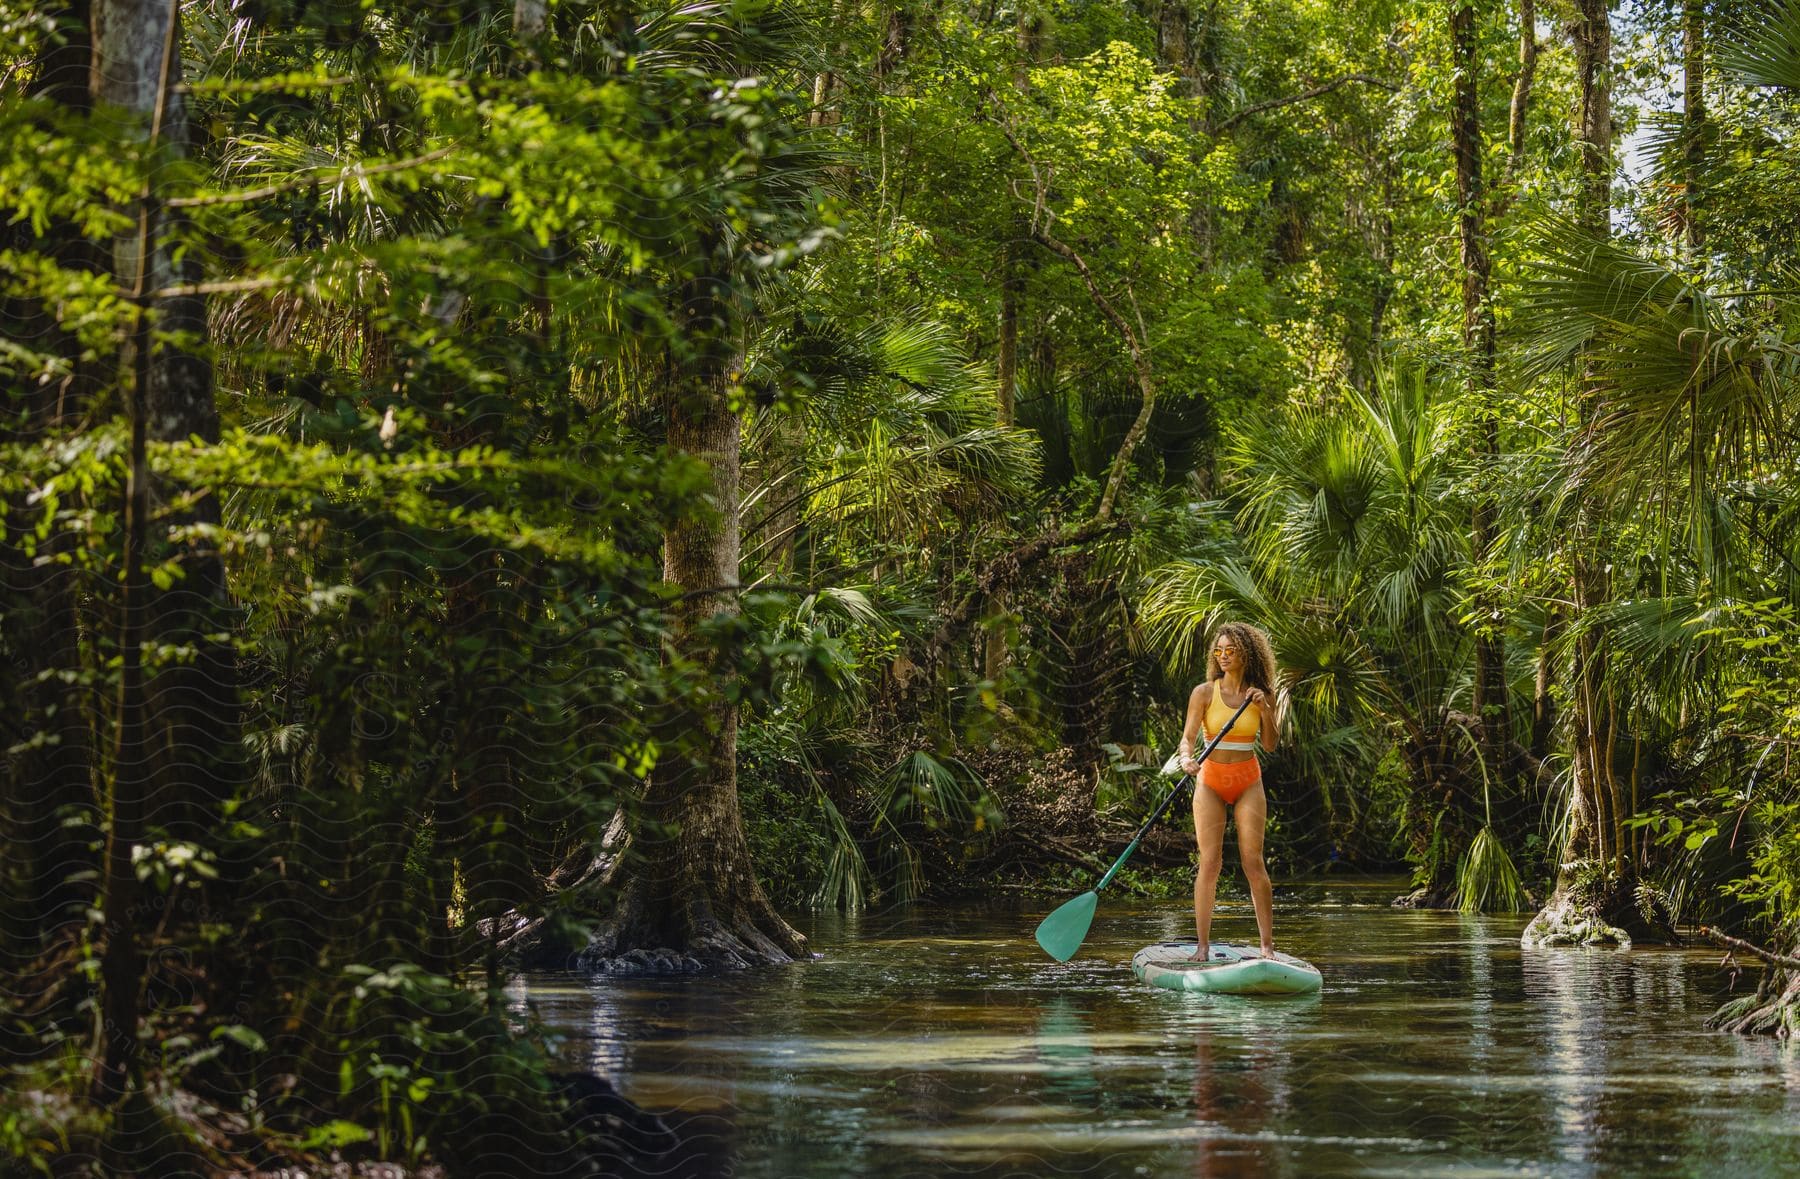 a woman stands on a surfboard and paddles down a river in a jungle